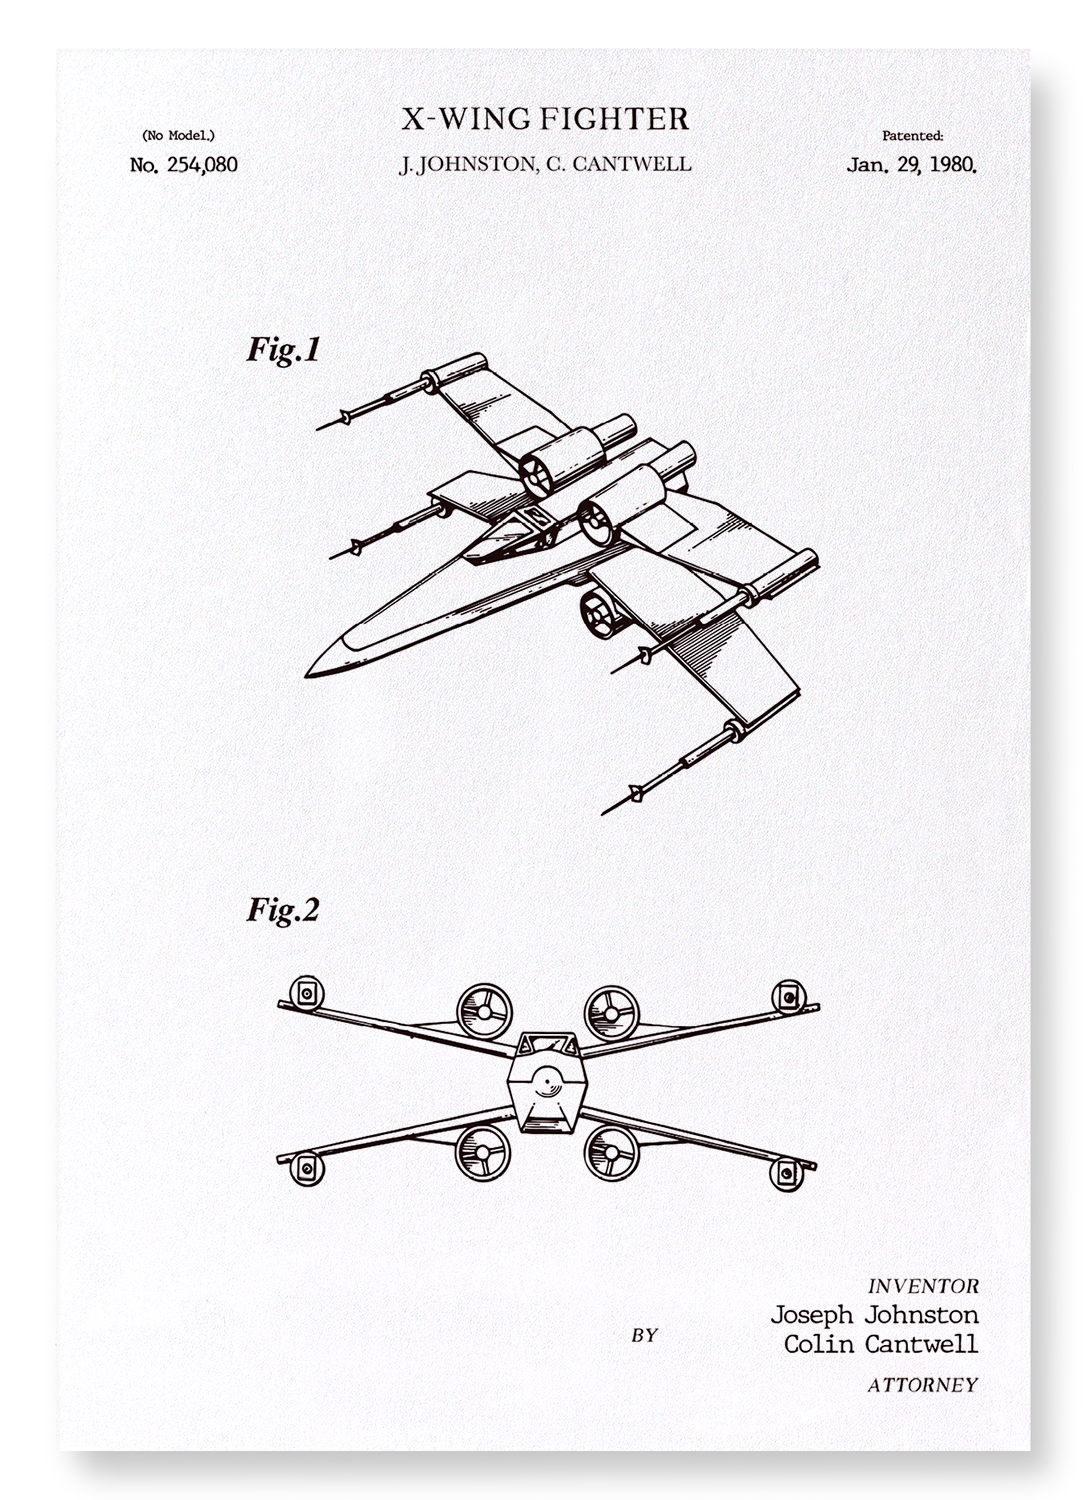 PATENT OF X-WING FIGHTER (1980)